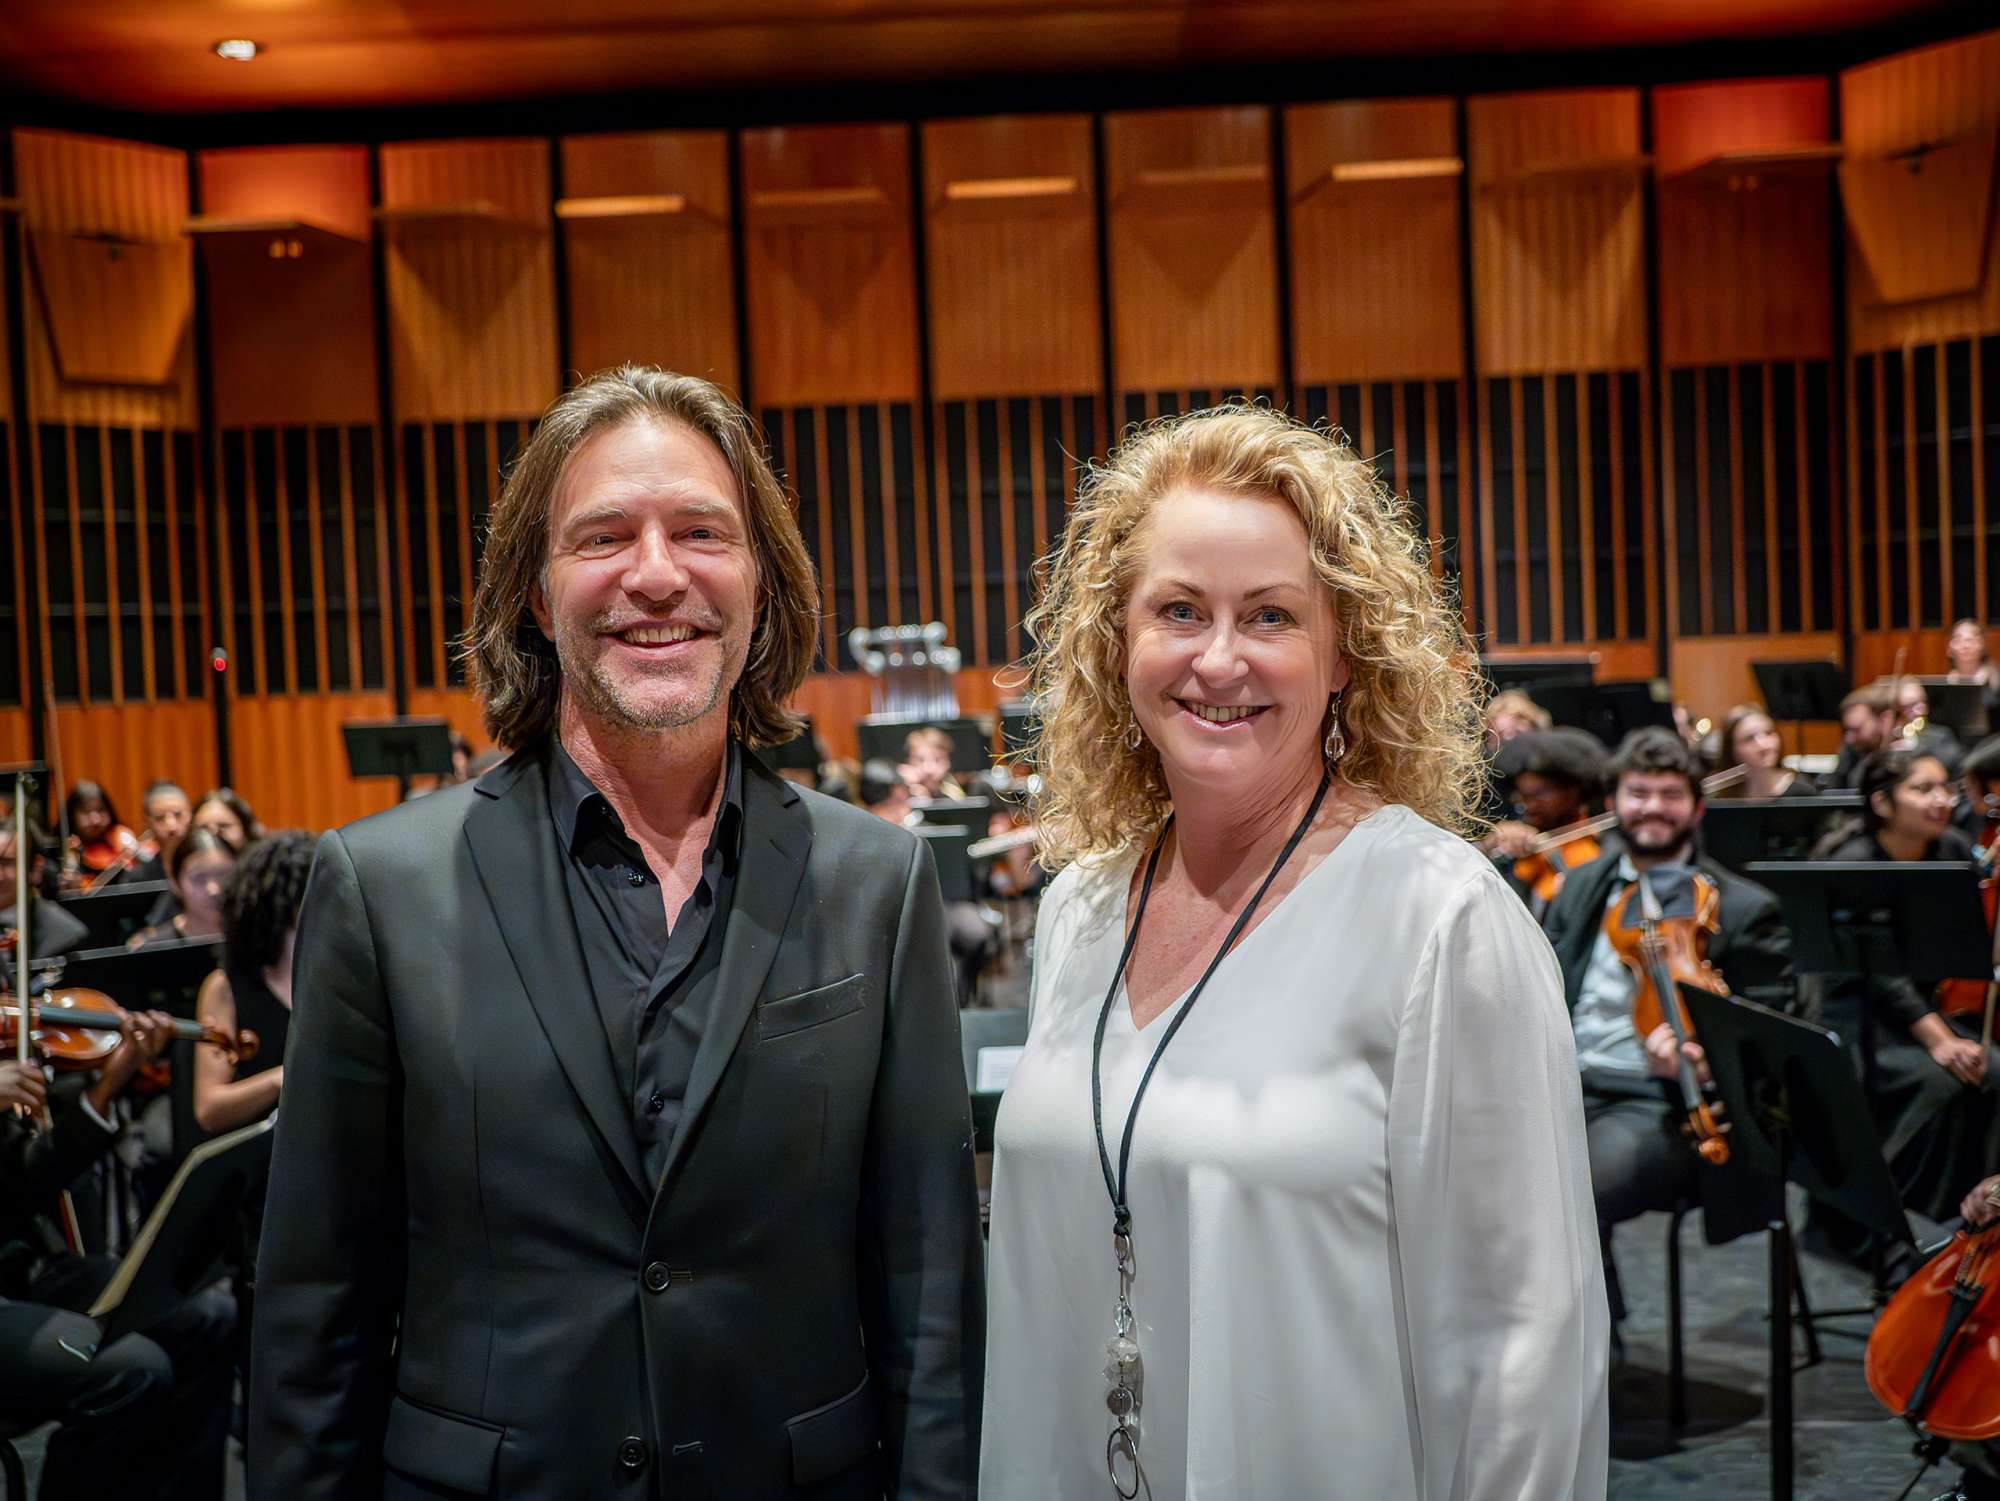 Eric Whittacre and Heather J. Buchanan